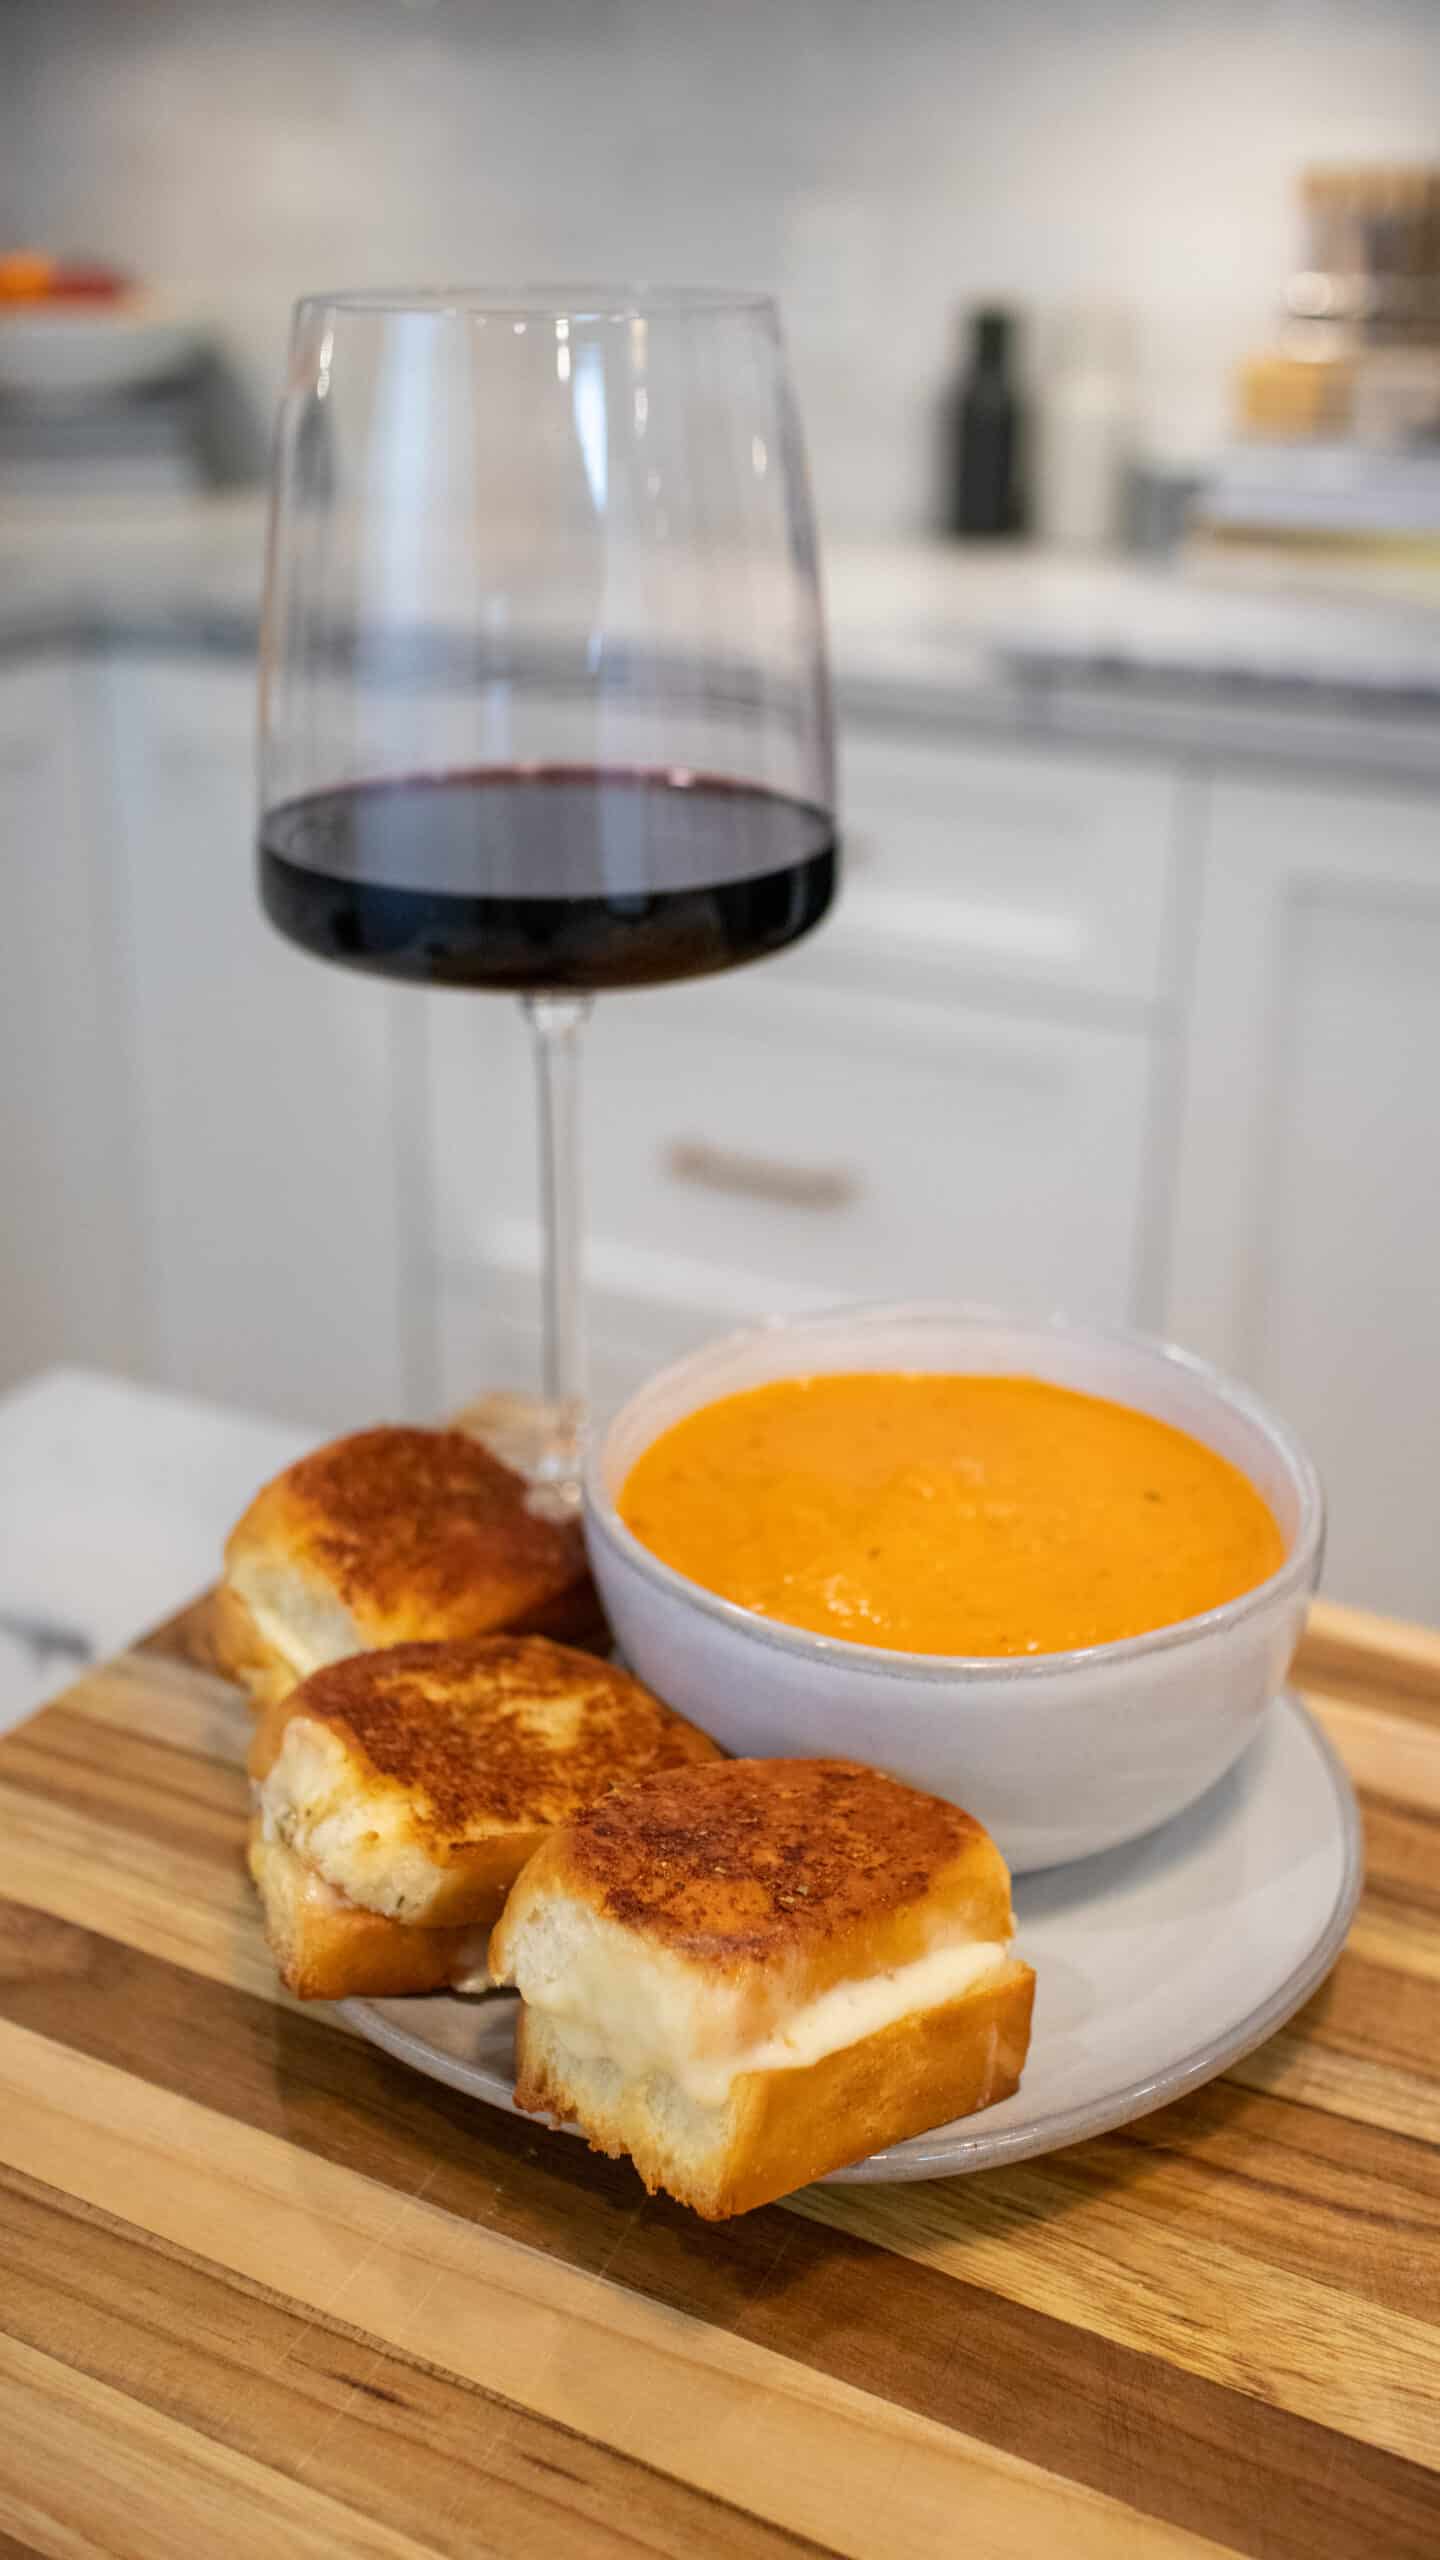 These Mini Baked Grilled Cheese bites with nordstrom tomato basil soup is the perfect appetizer or meal